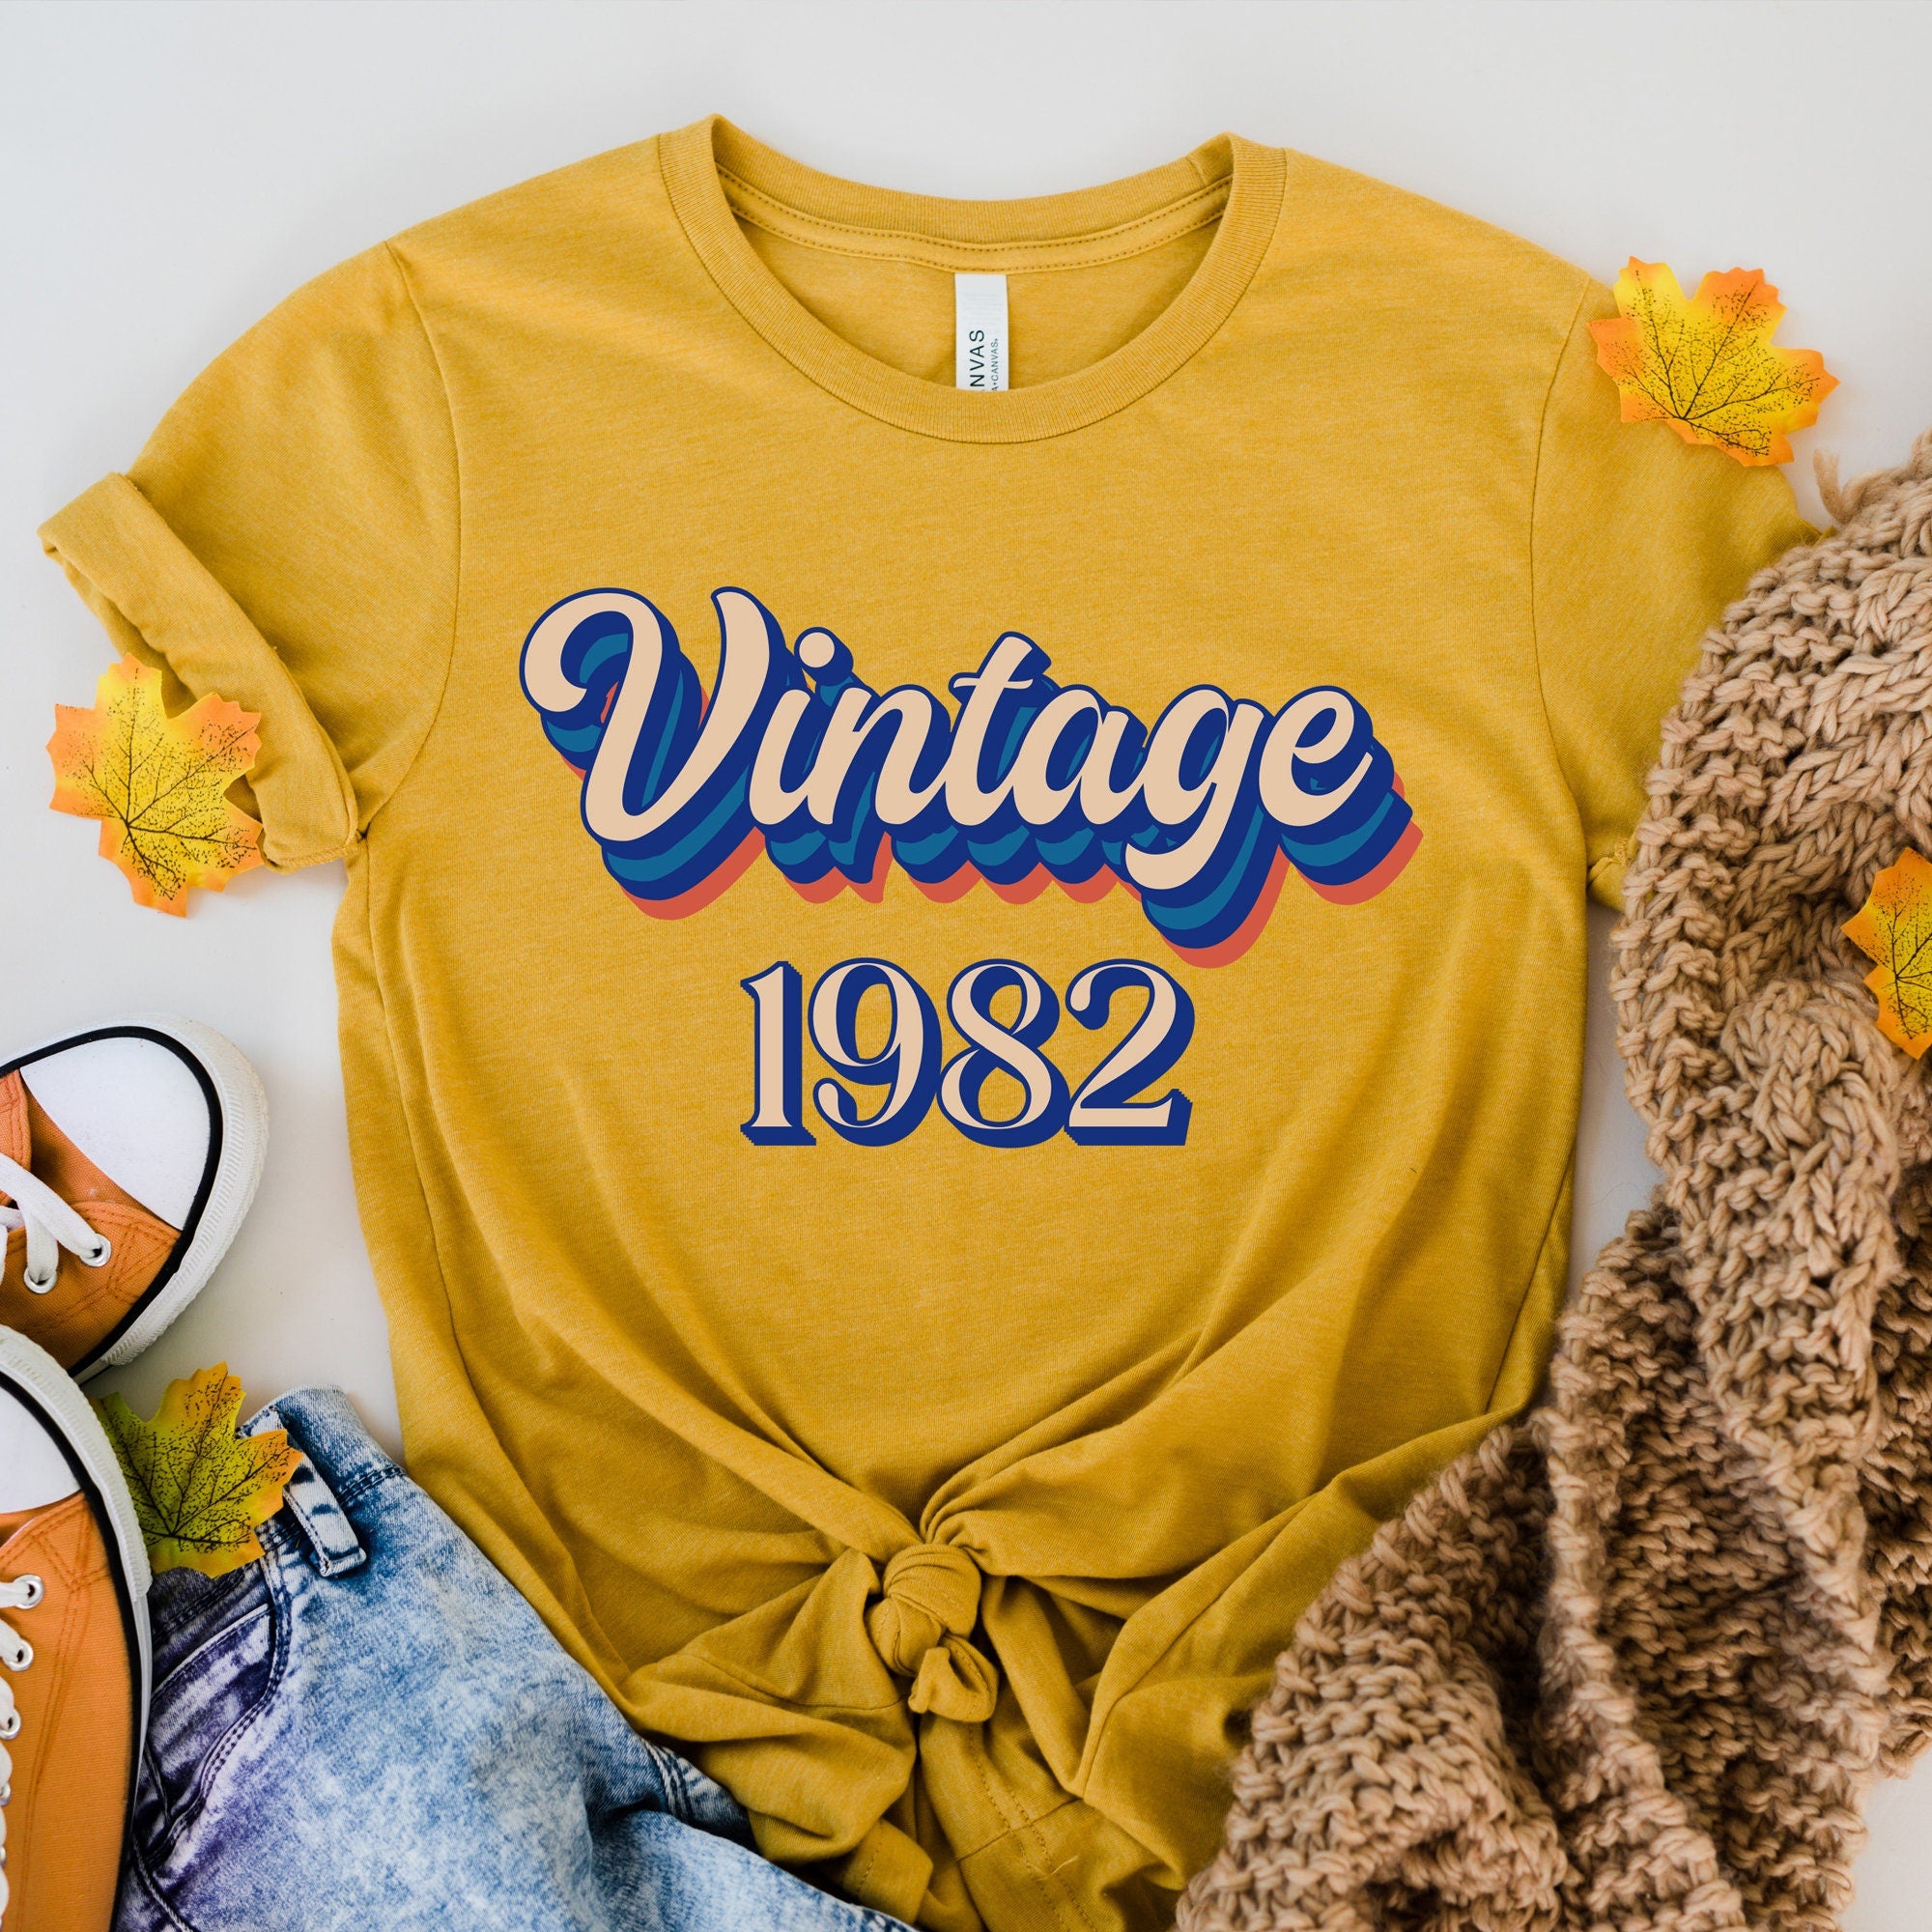 Birthday Year T-Shirt, Any Vintage Year, Unisex Birthday Top, Gift For Her Or Him